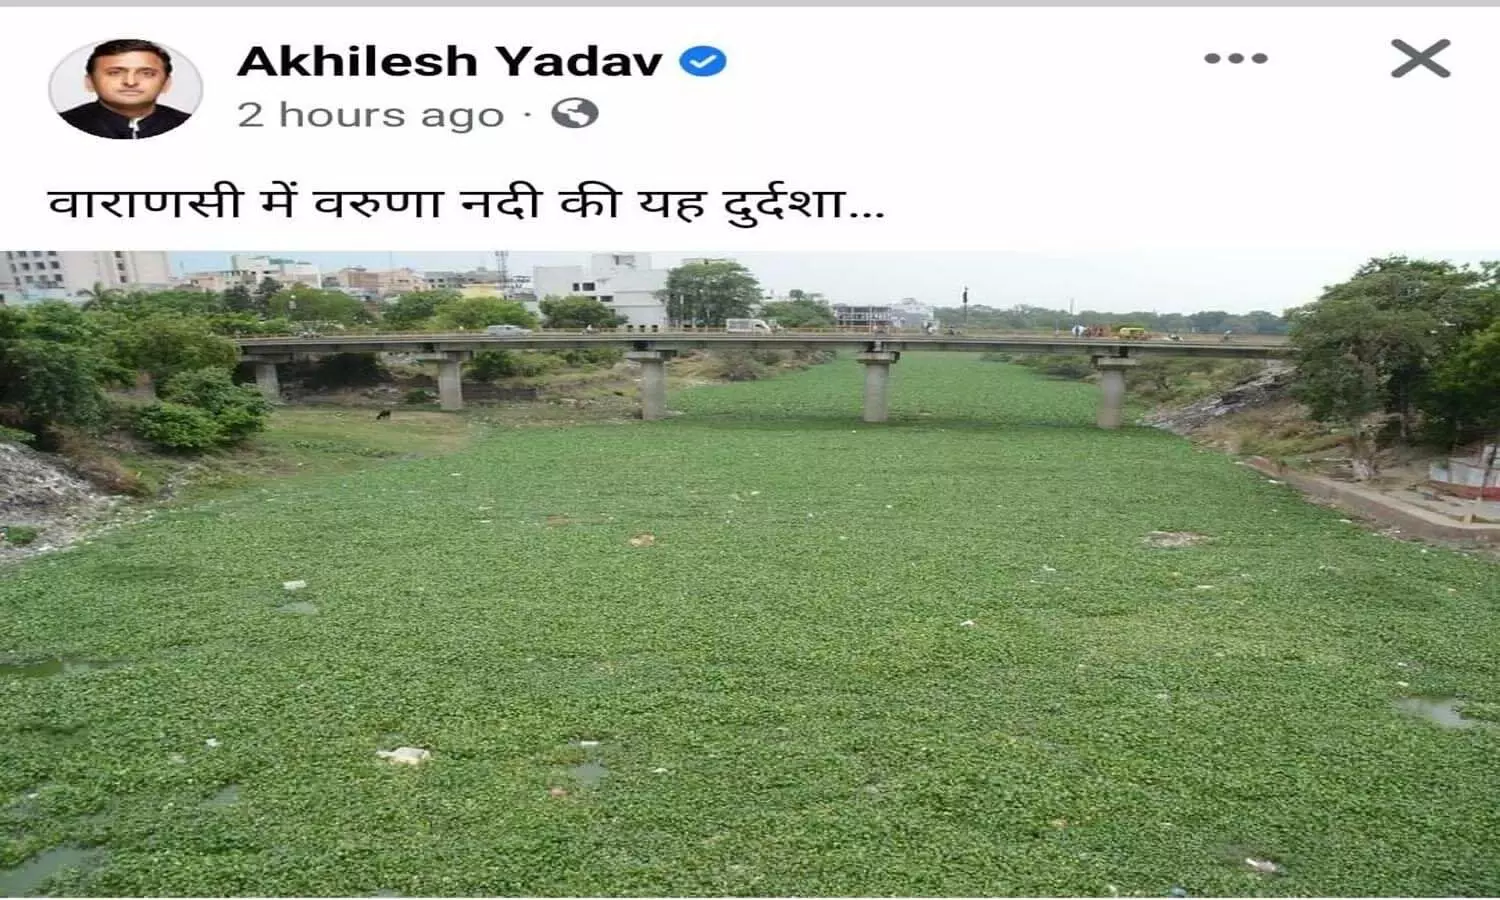 Akhilesh Yadav got trolled for tweeting wrong photo, know what the trollers said